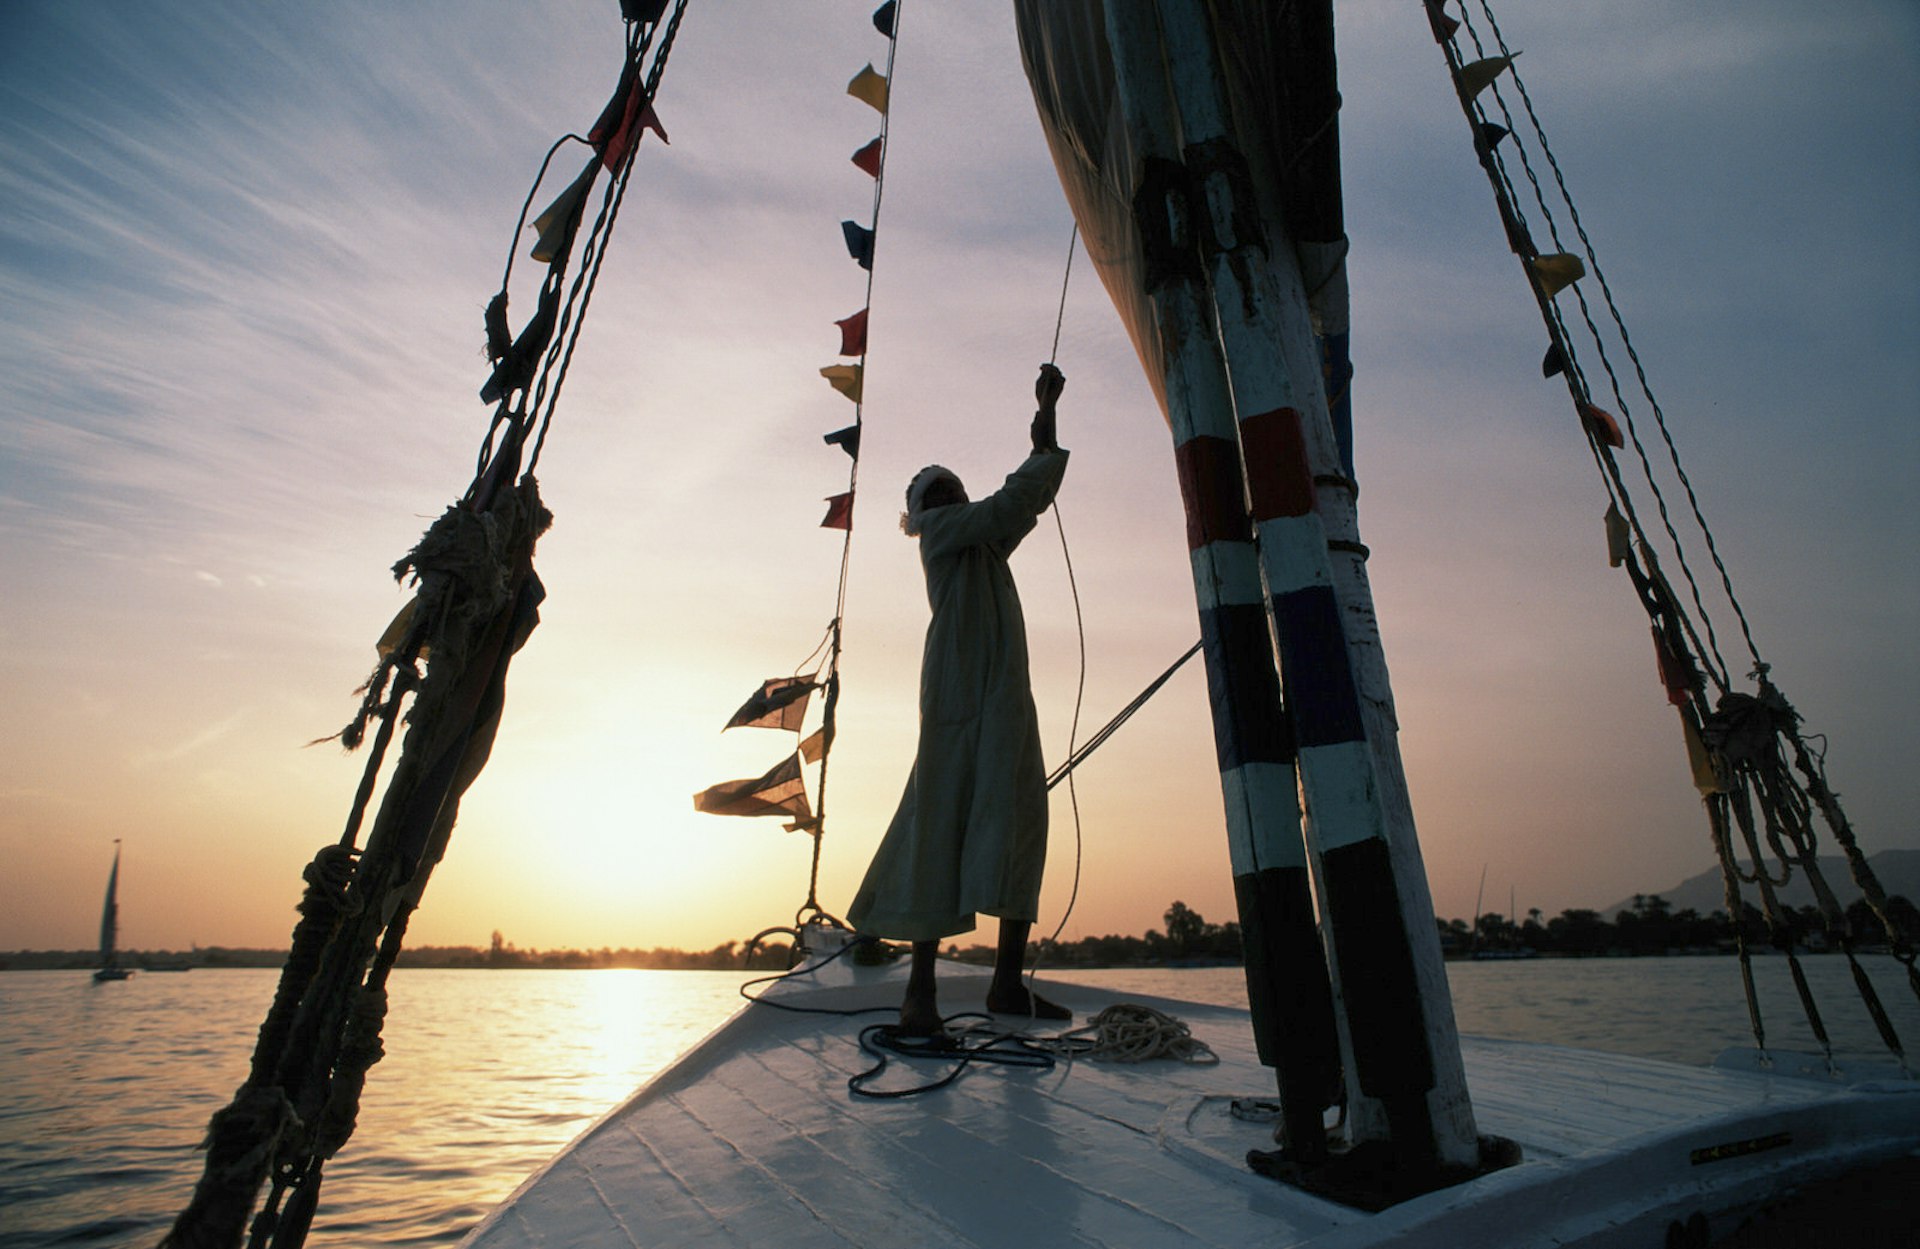 Egypt, Aswan, man sailing felucca on the River Nile at sunset © Nicholas Pitt / Getty Images